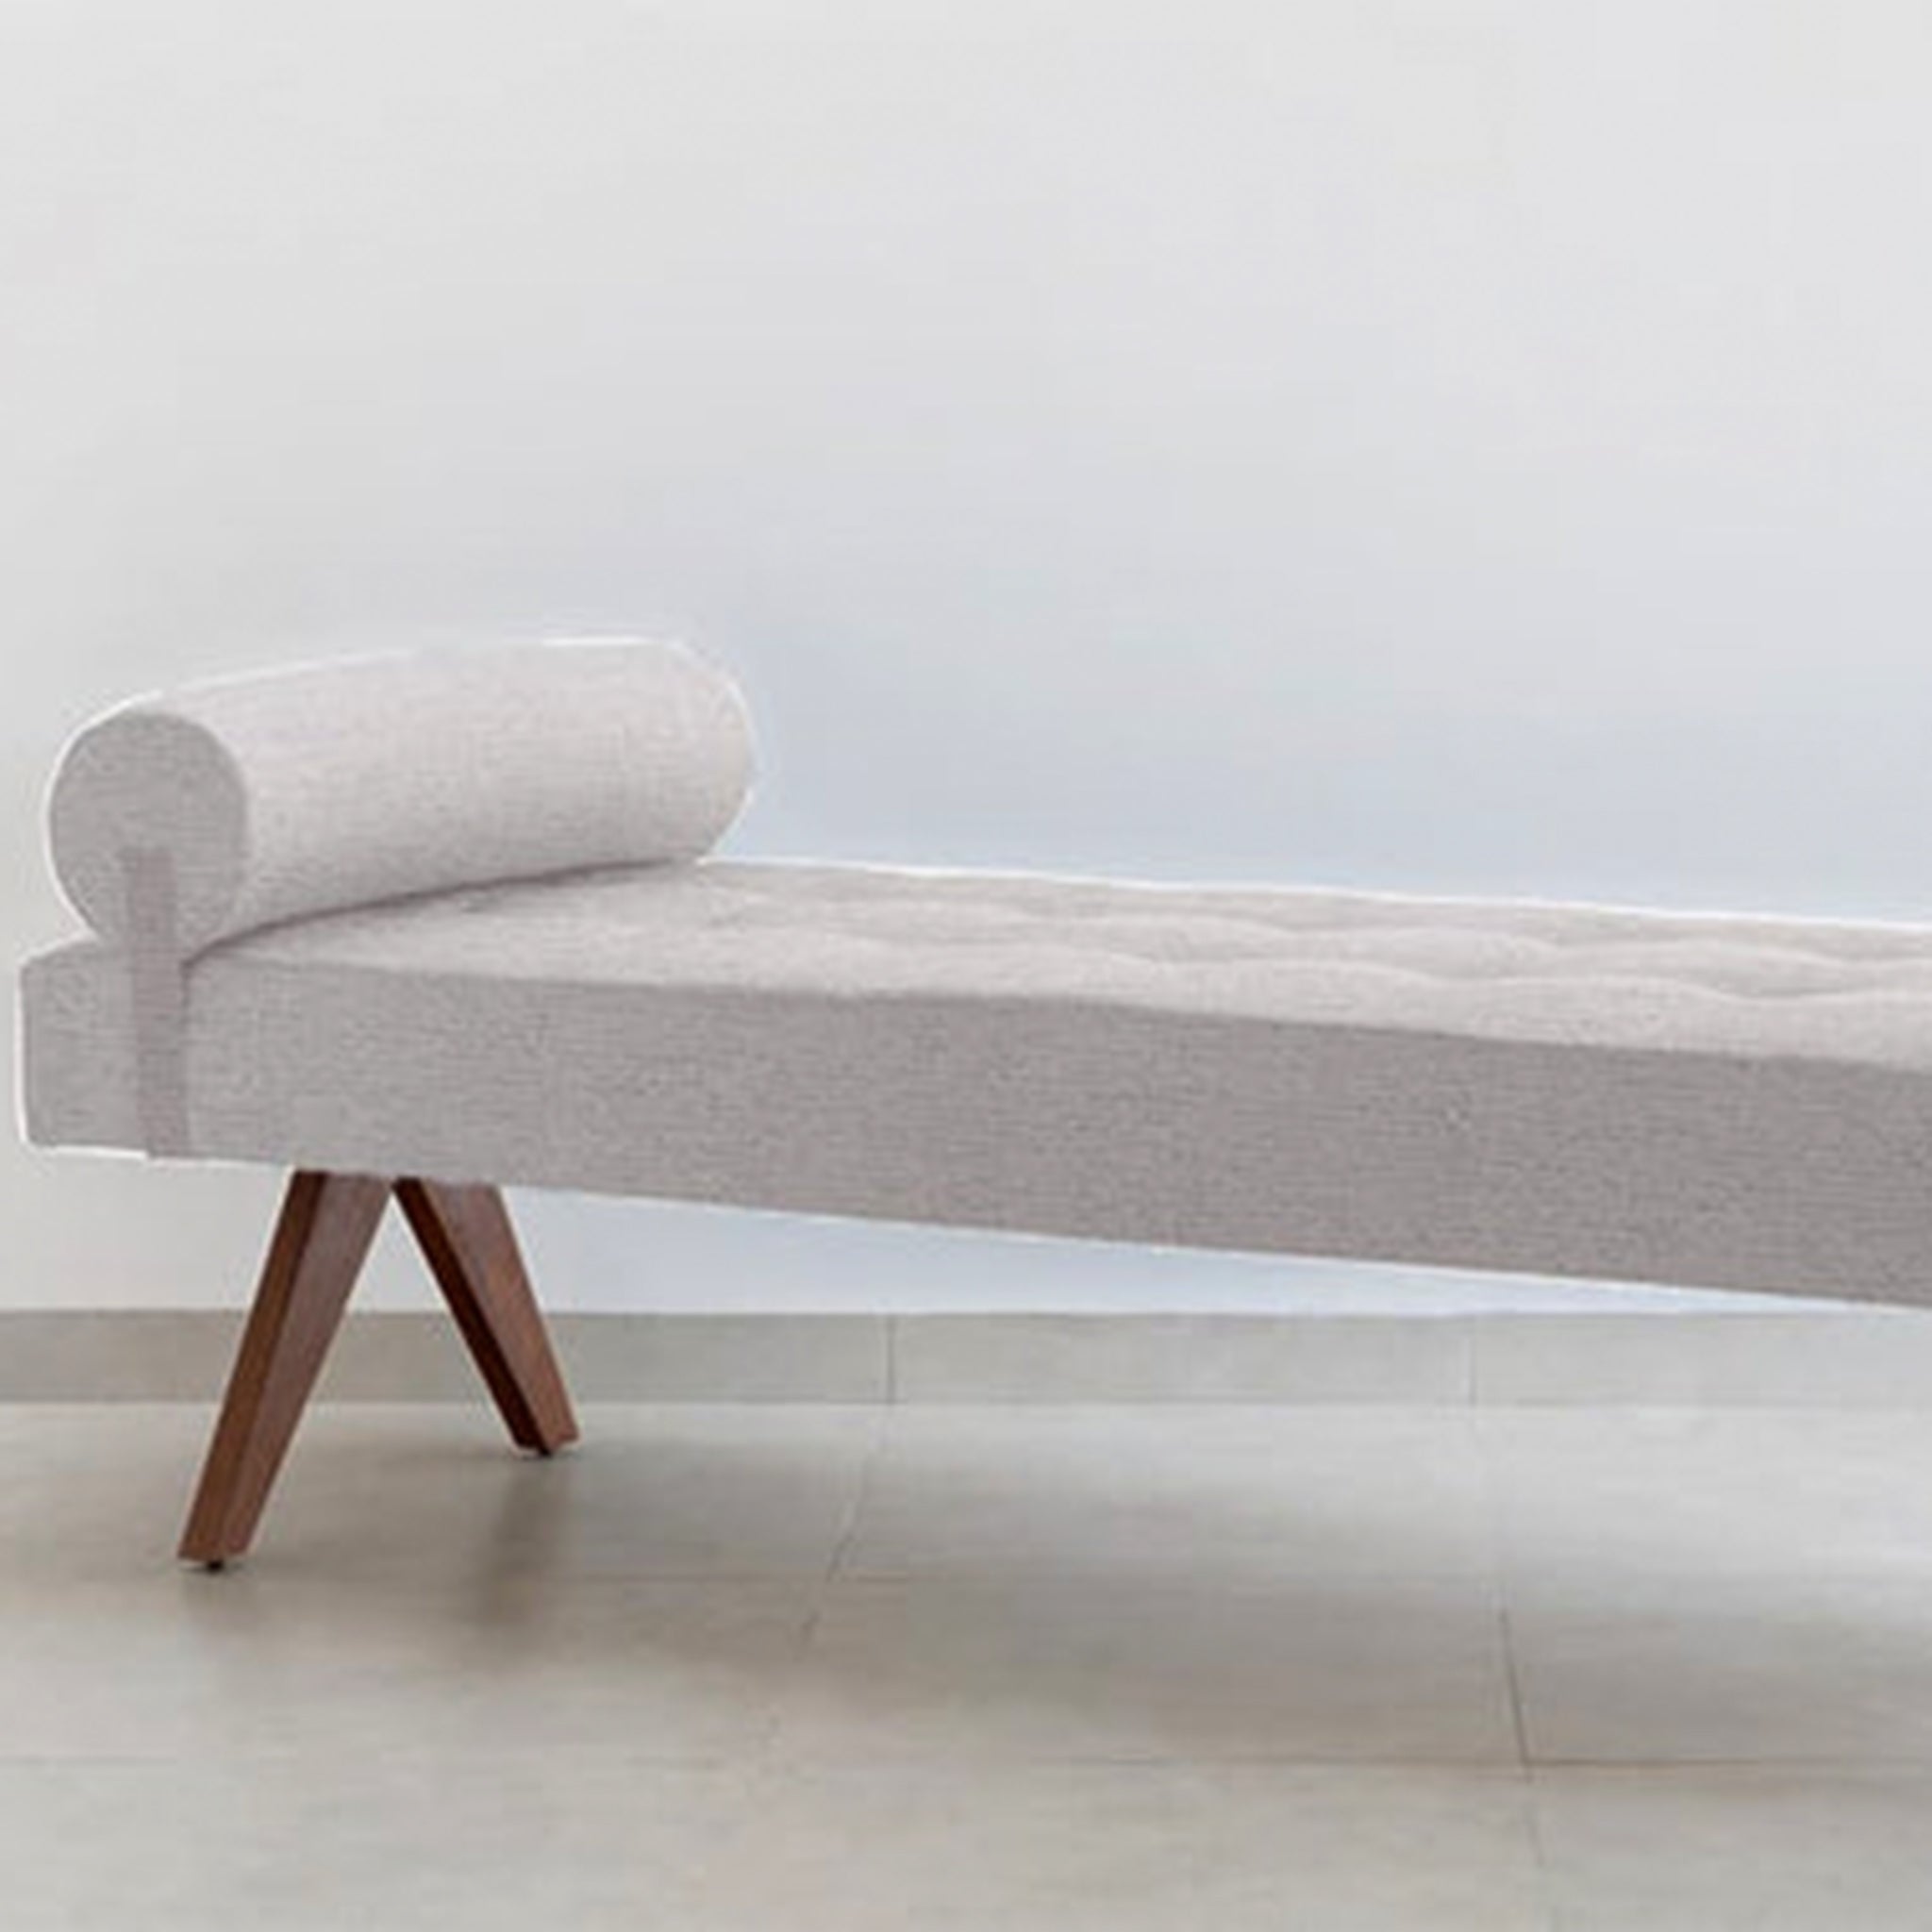 The Jack Daybed with a solid wood frame